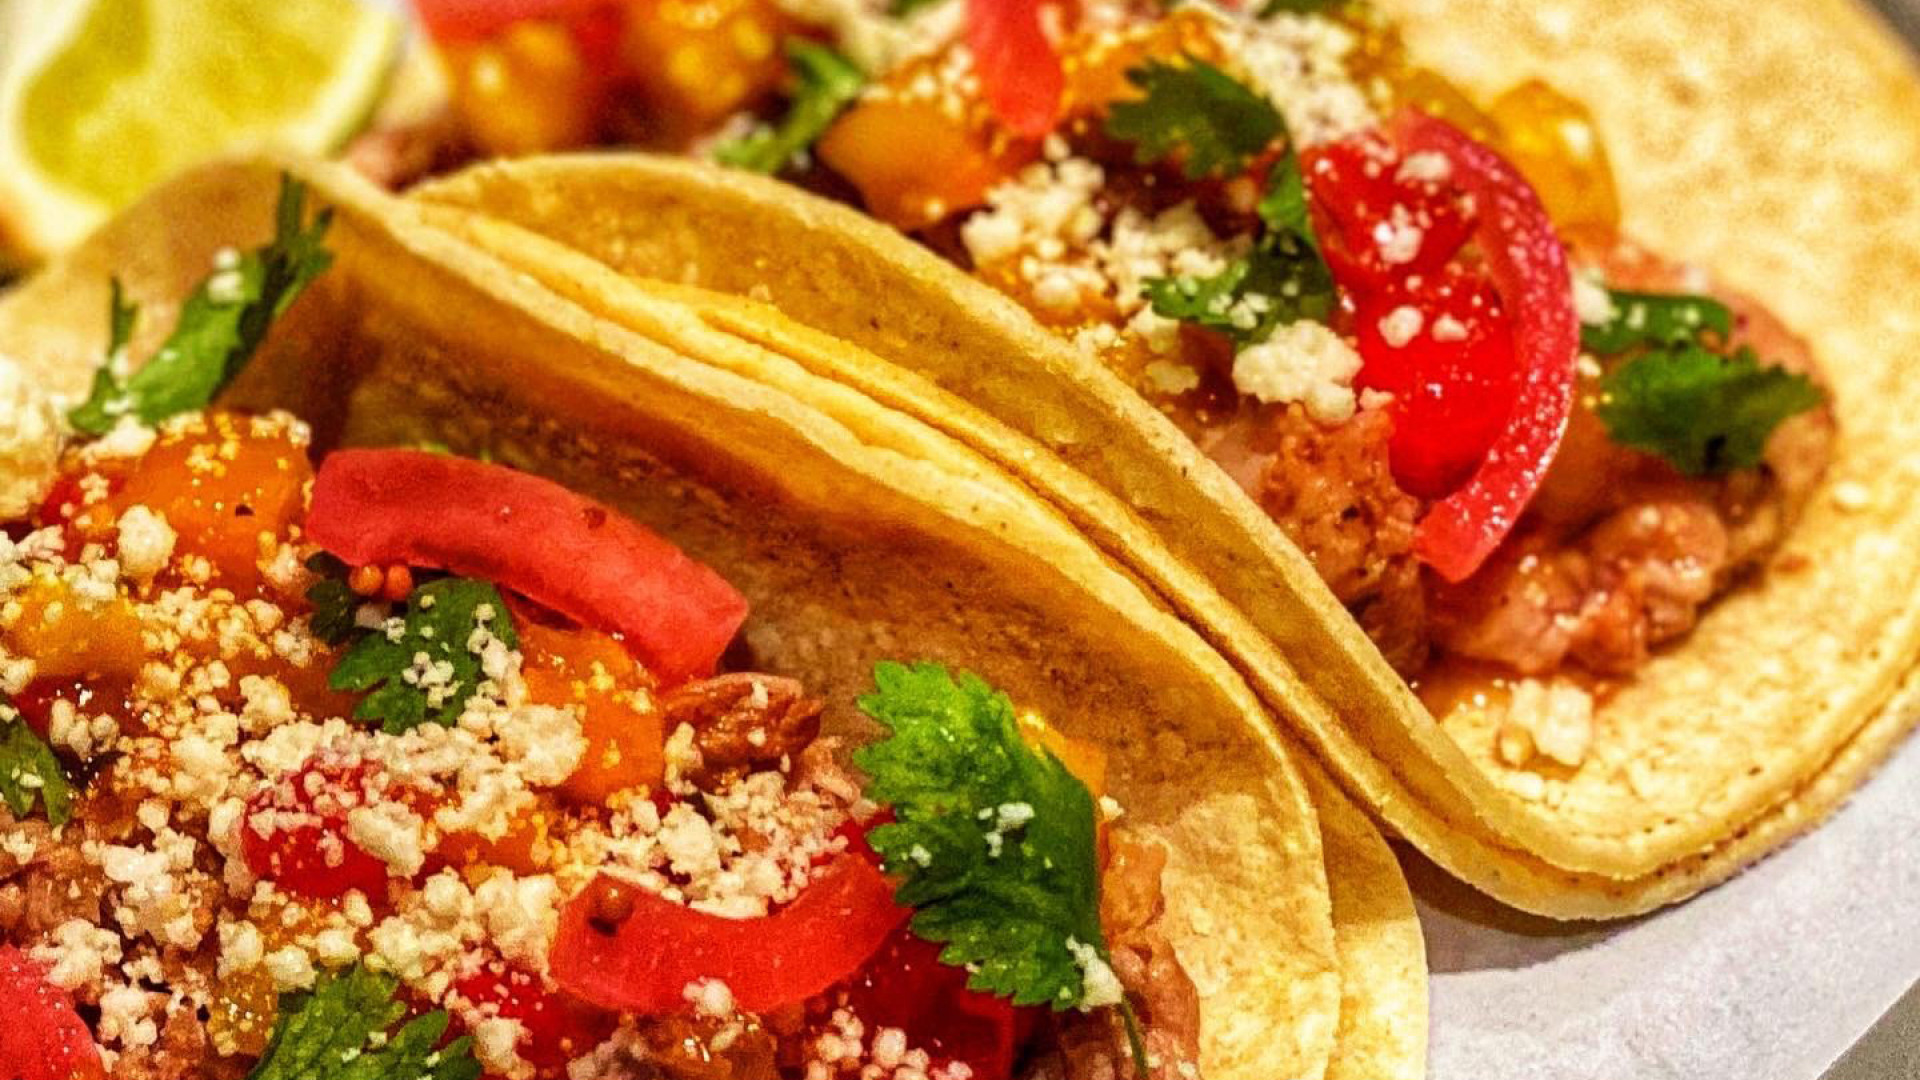 New Hampshire restaurants and activities | Tacos at 815 Cocktails and Provisions in Manchester